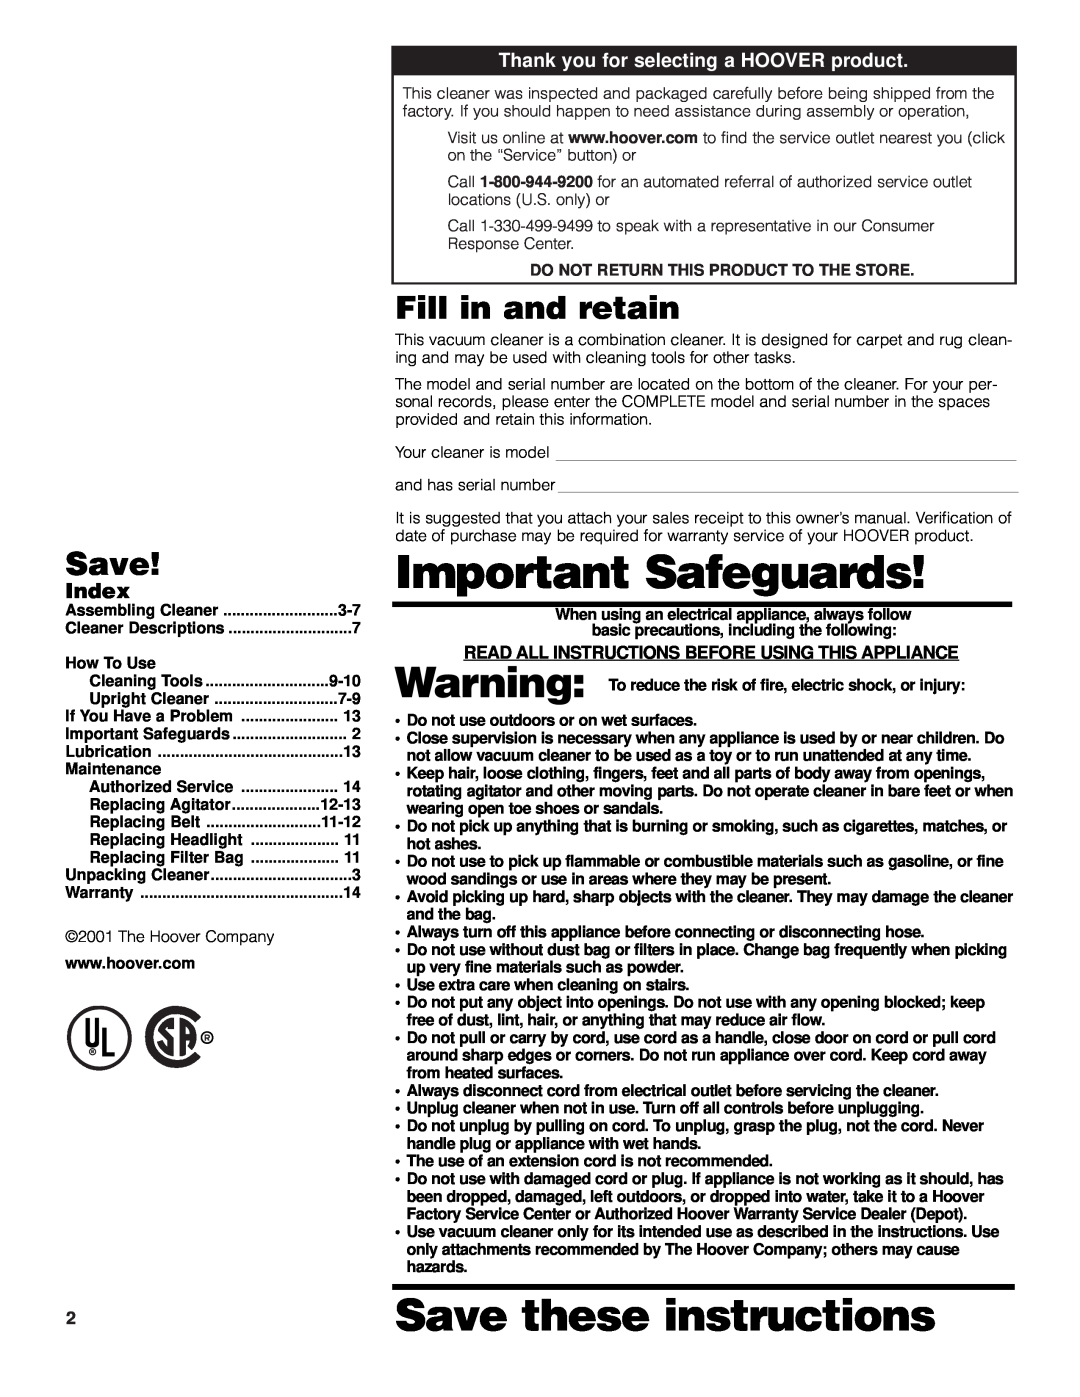 Hoover 4600 owner manual Fill in and retain, Important Safeguards, Save these instructions 